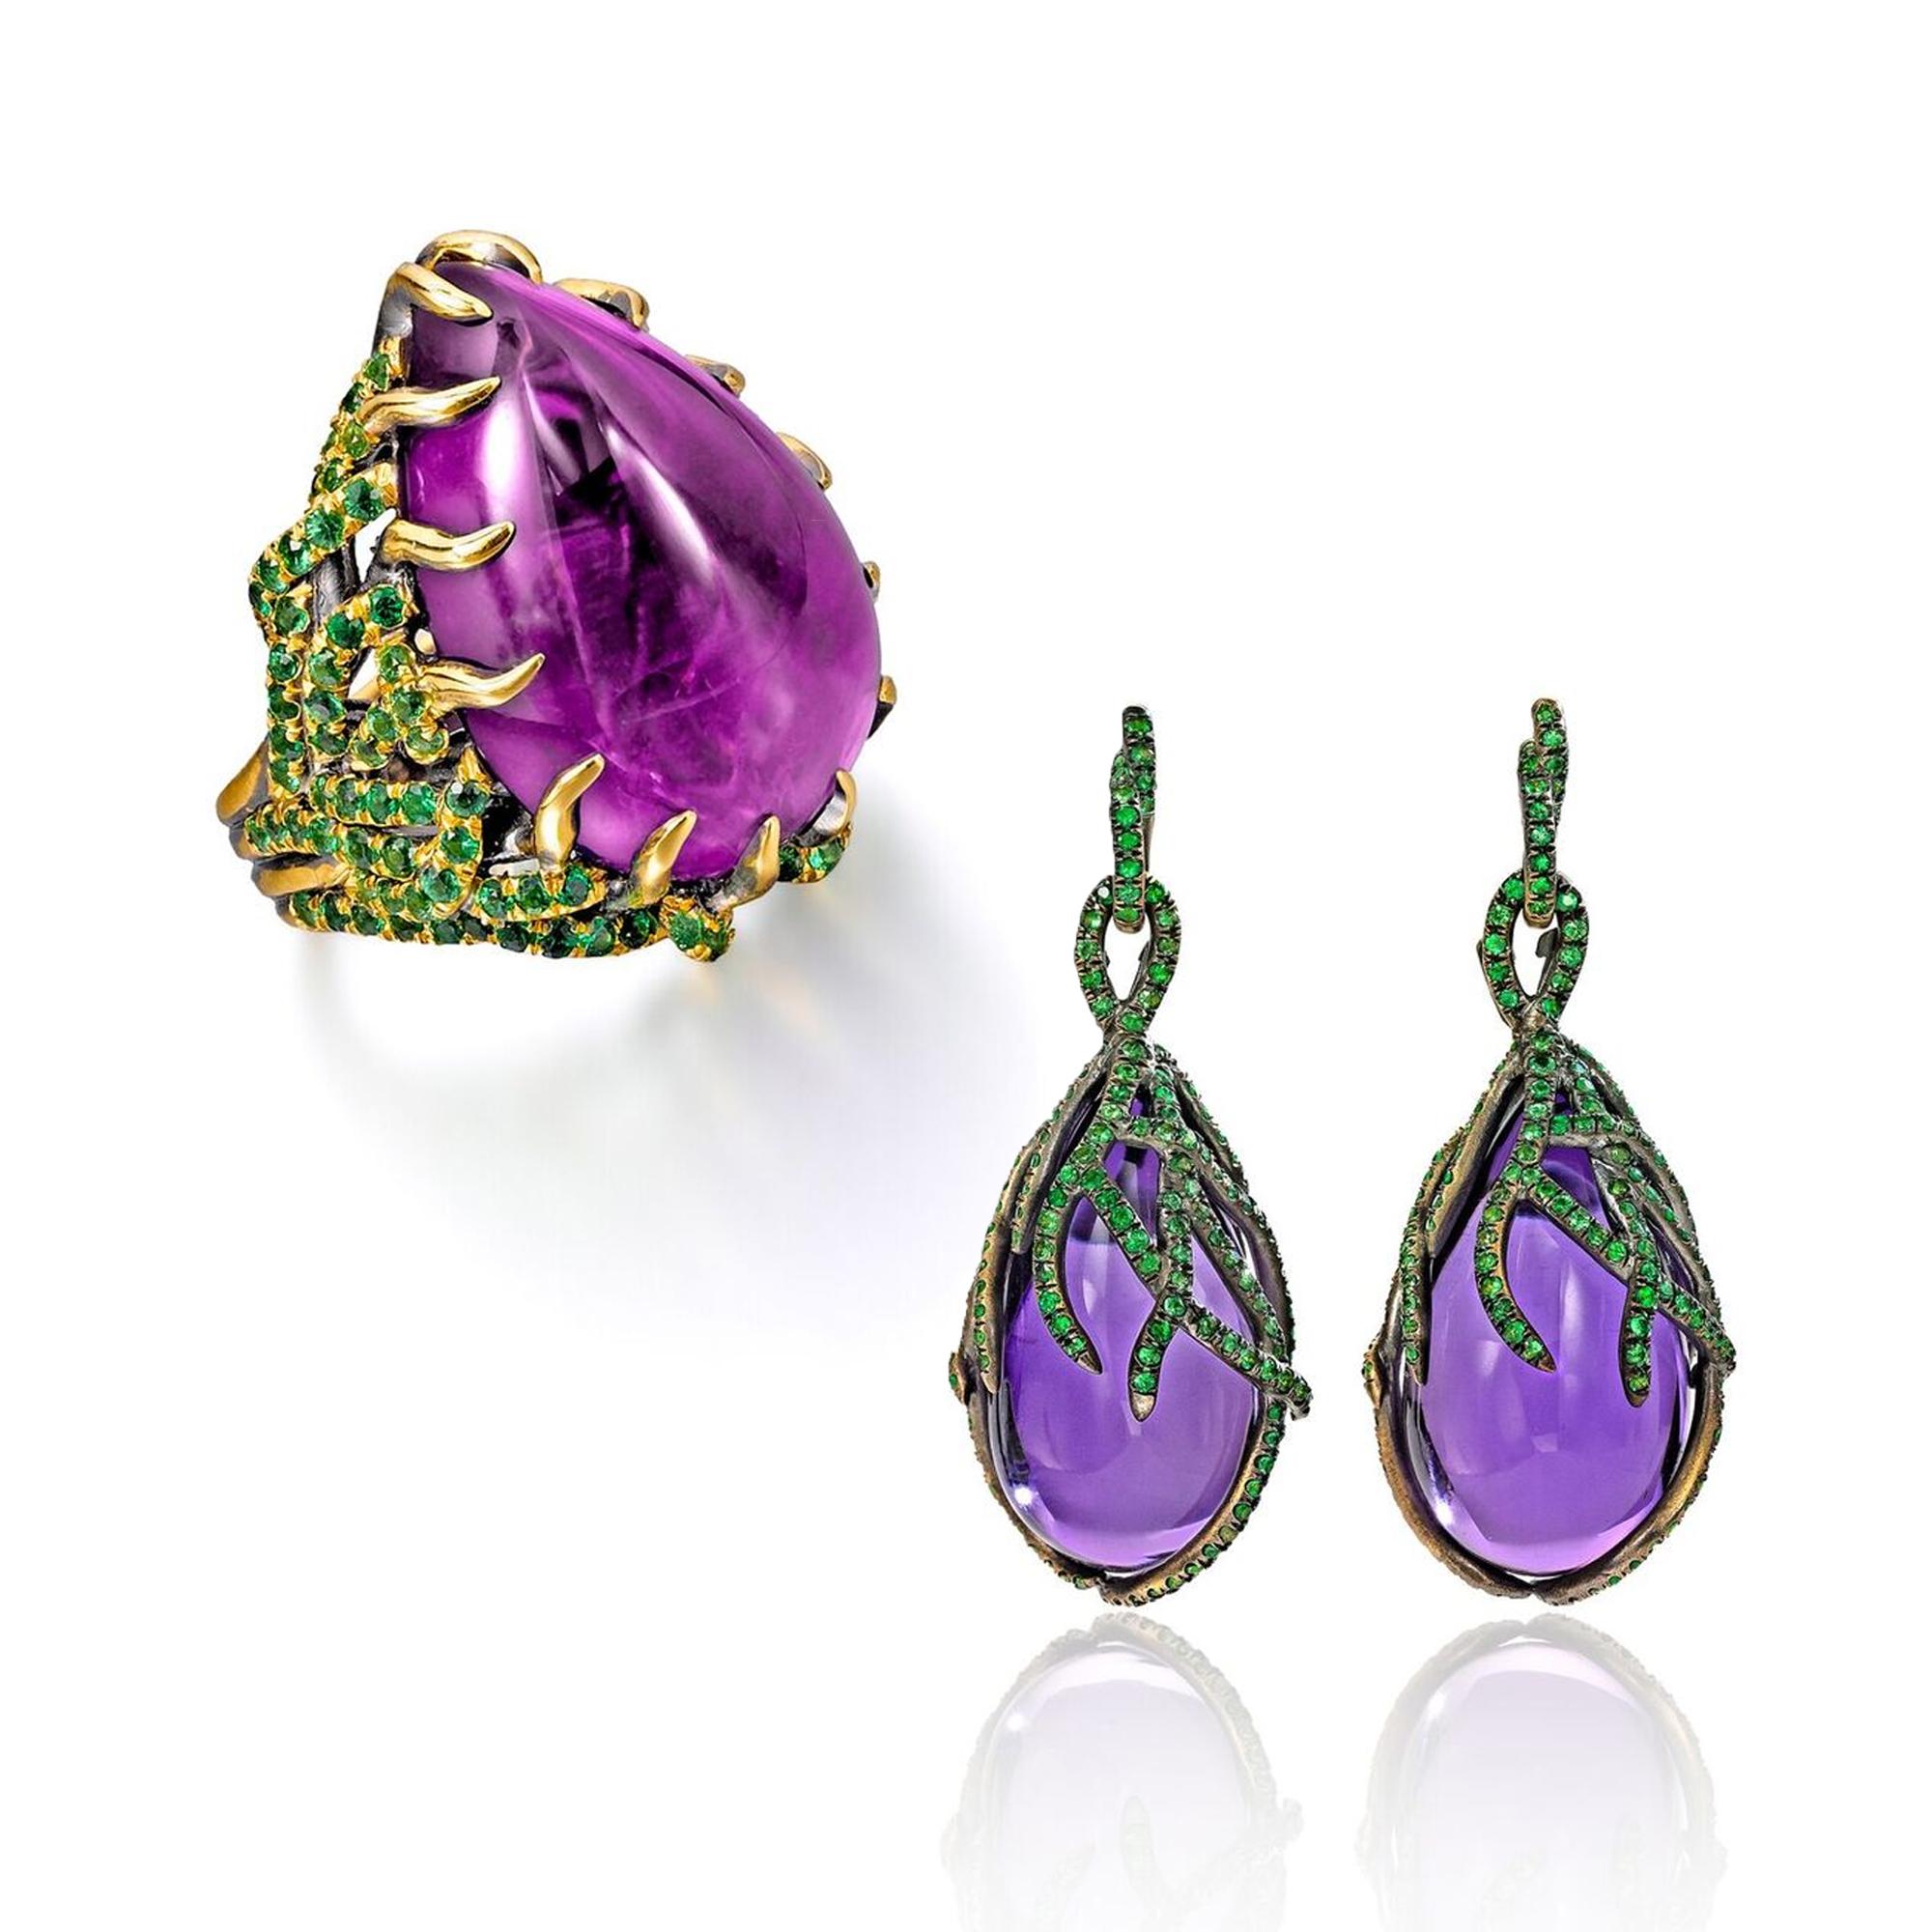 Wendy Brandes Cabochon Amethyst and Tsavorite Ring and Earrings Set 4